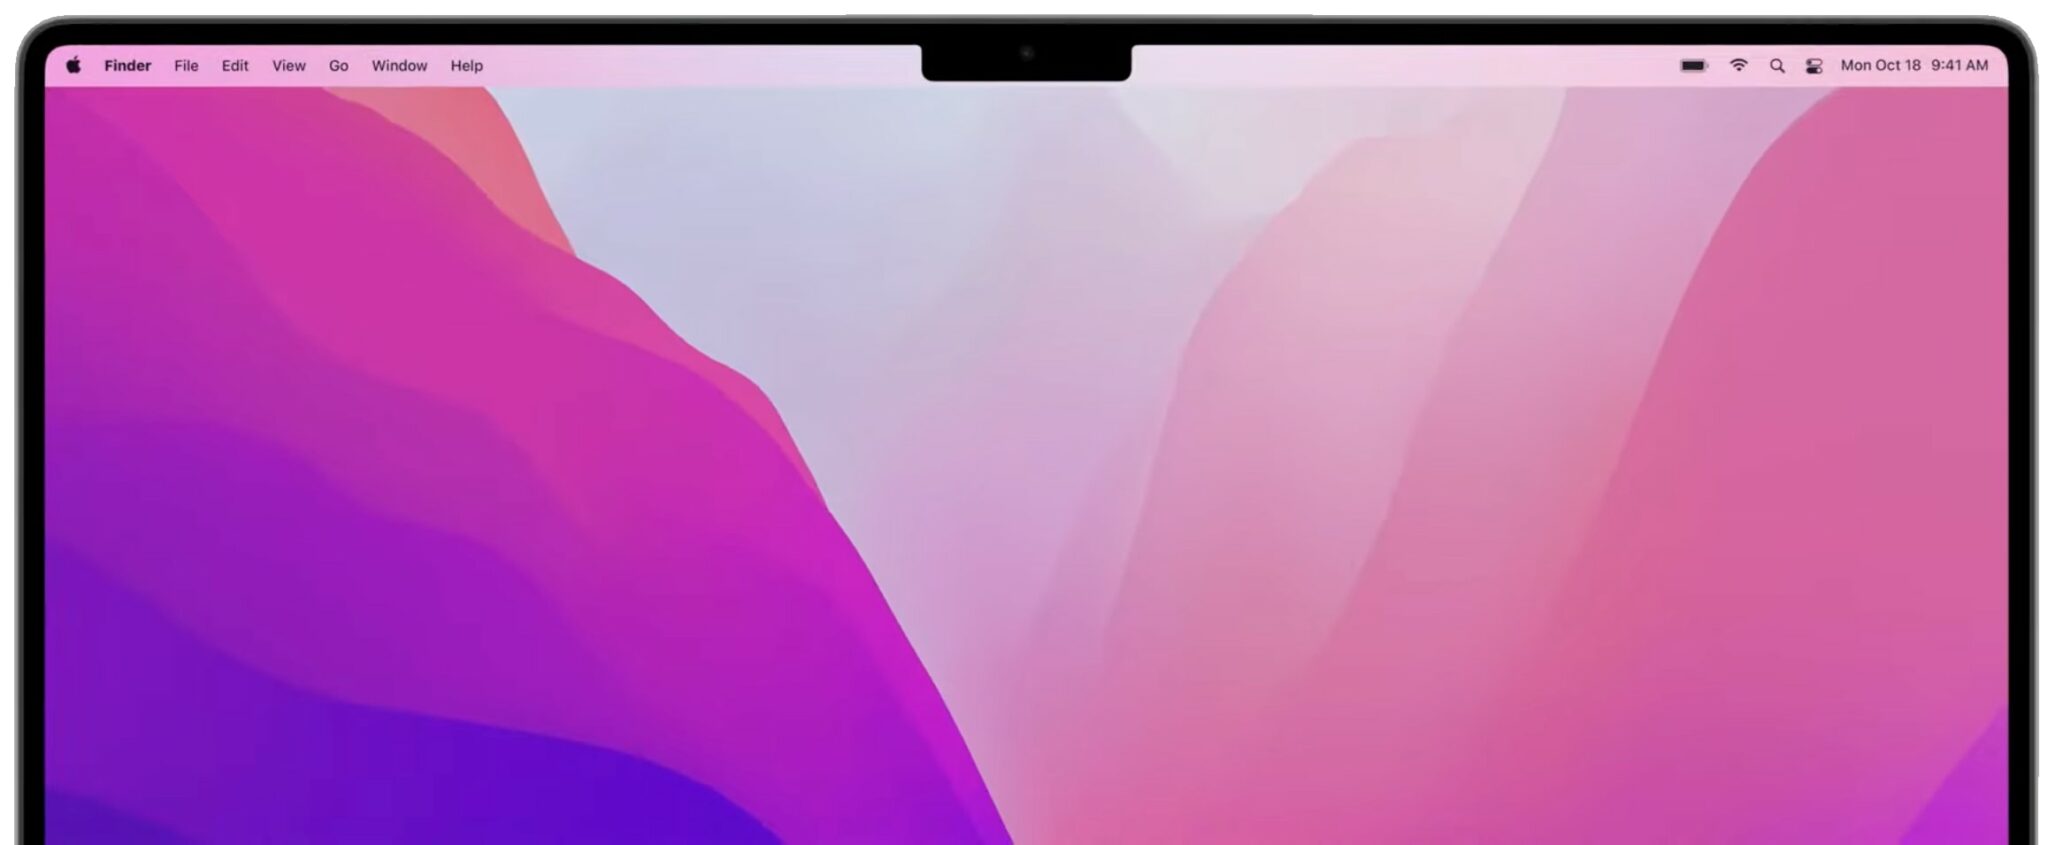 Frustrated by the notch on your MacBook Pro? Learn some workarounds. | CreativeTechs.com